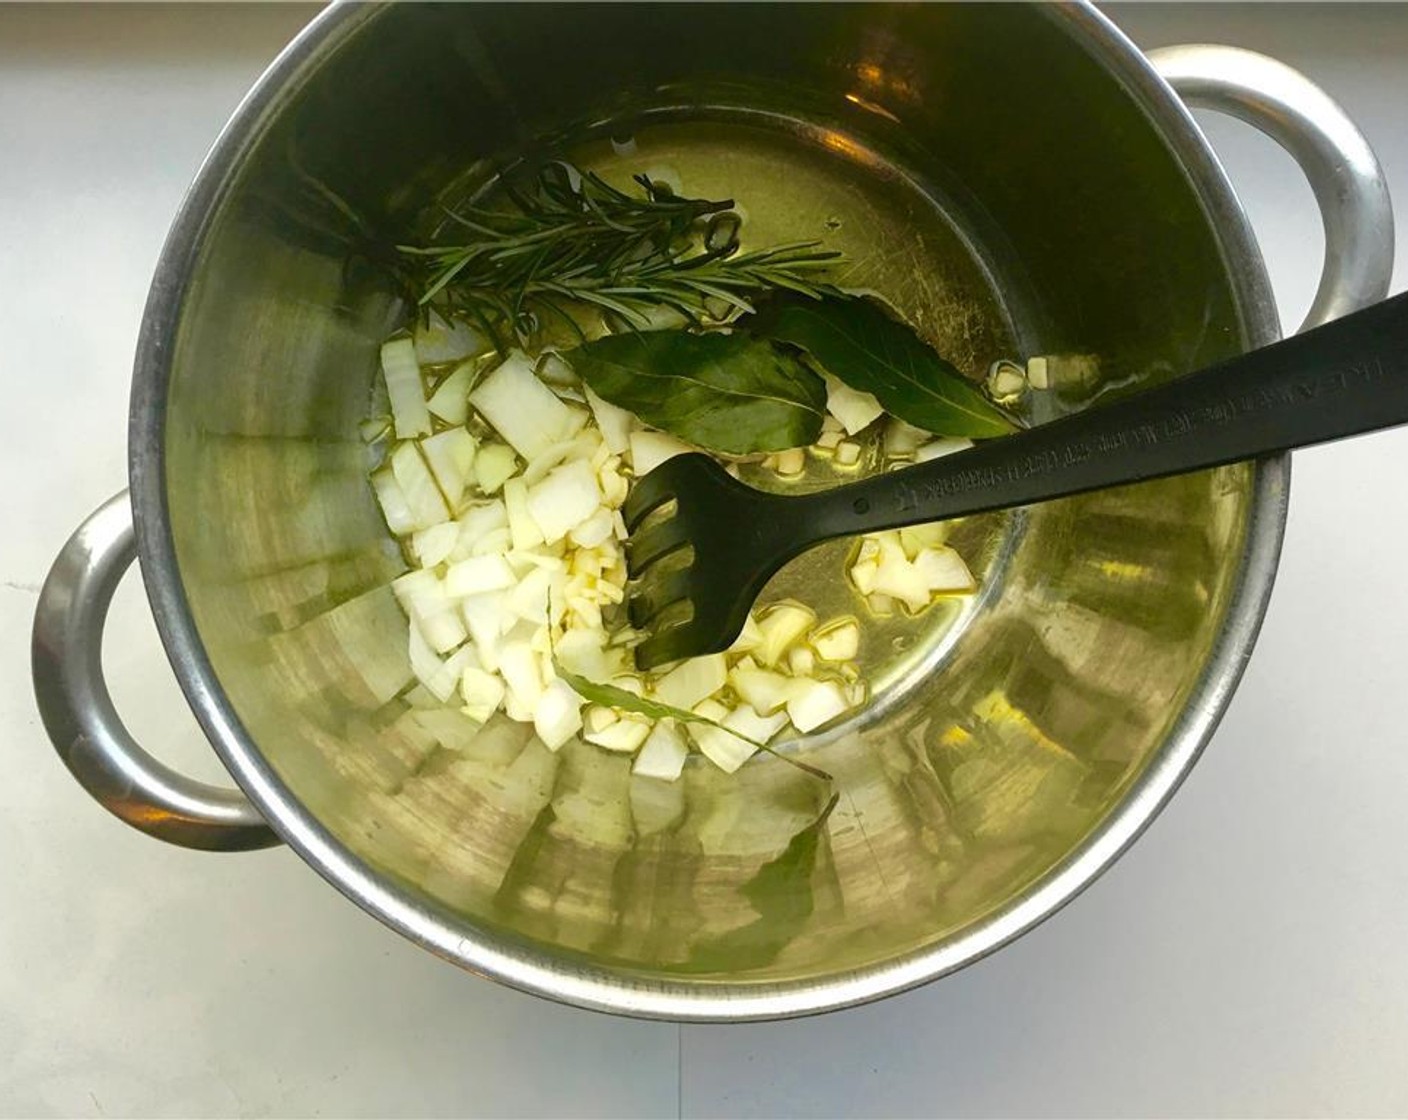 step 2 In a high pan, pour a good splash of Olive Oil (as needed) and place it over medium heat. Once hot, add the Yellow Onion (1), Garlic (5 cloves), Fresh Rosemary (2 sprigs), and Bay Leaves (3). Stir and cook for about 5 minutes.